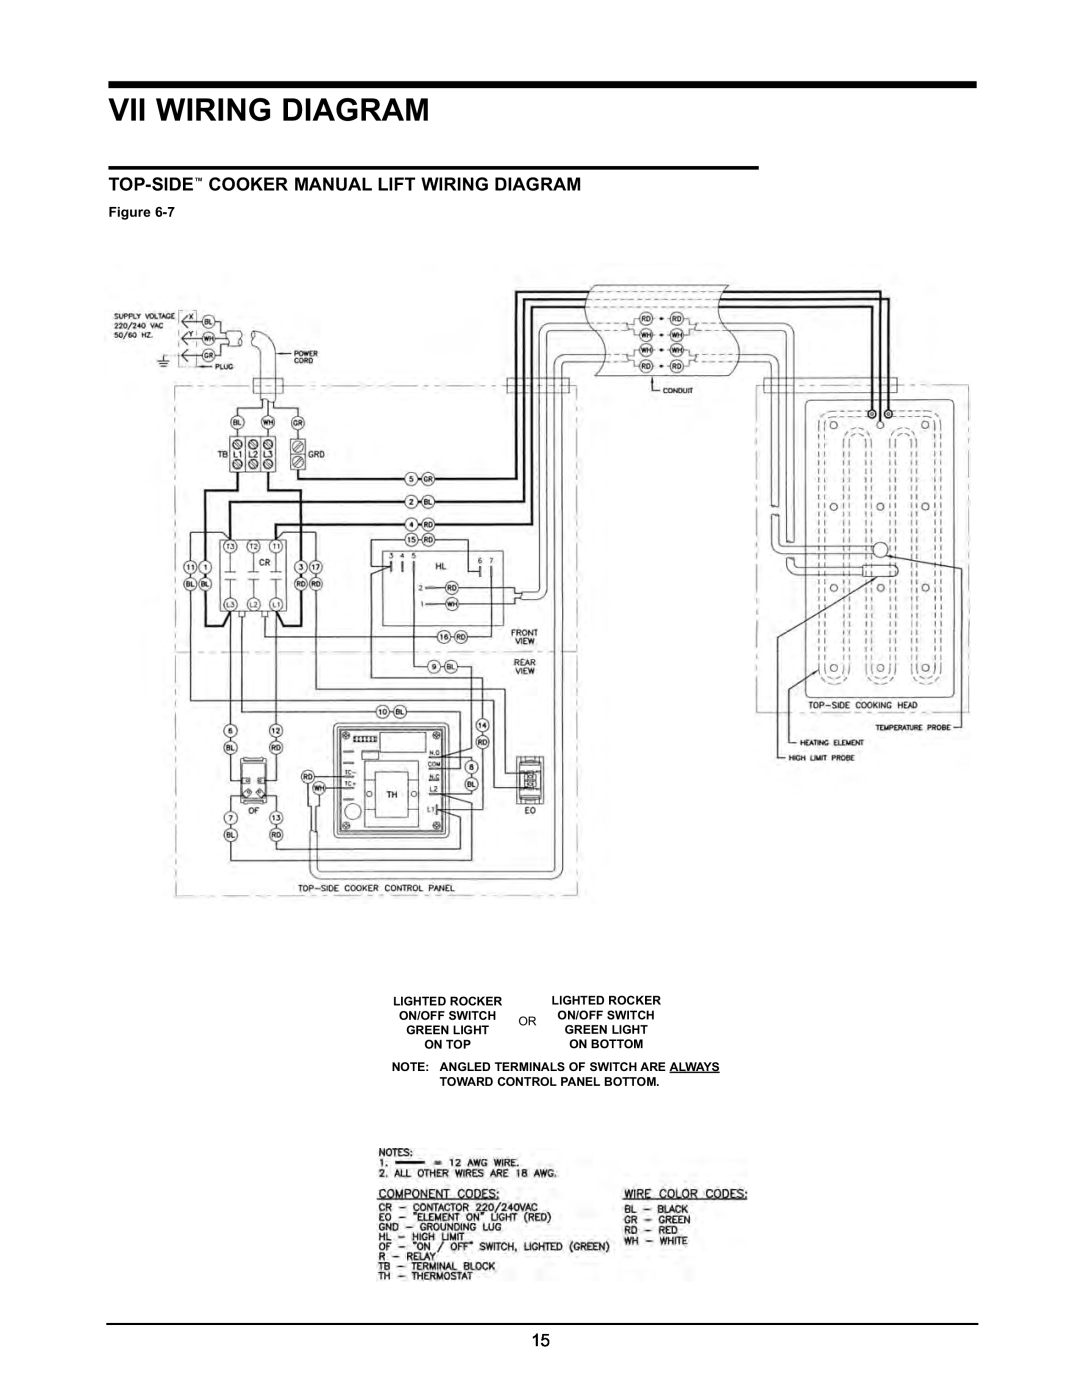 Keating Of Chicago 2005 Vii Wiring Diagram, Top-Side Cooker Manual Lift Wiring Diagram, On Top, On Bottom, Lighted Rocker 